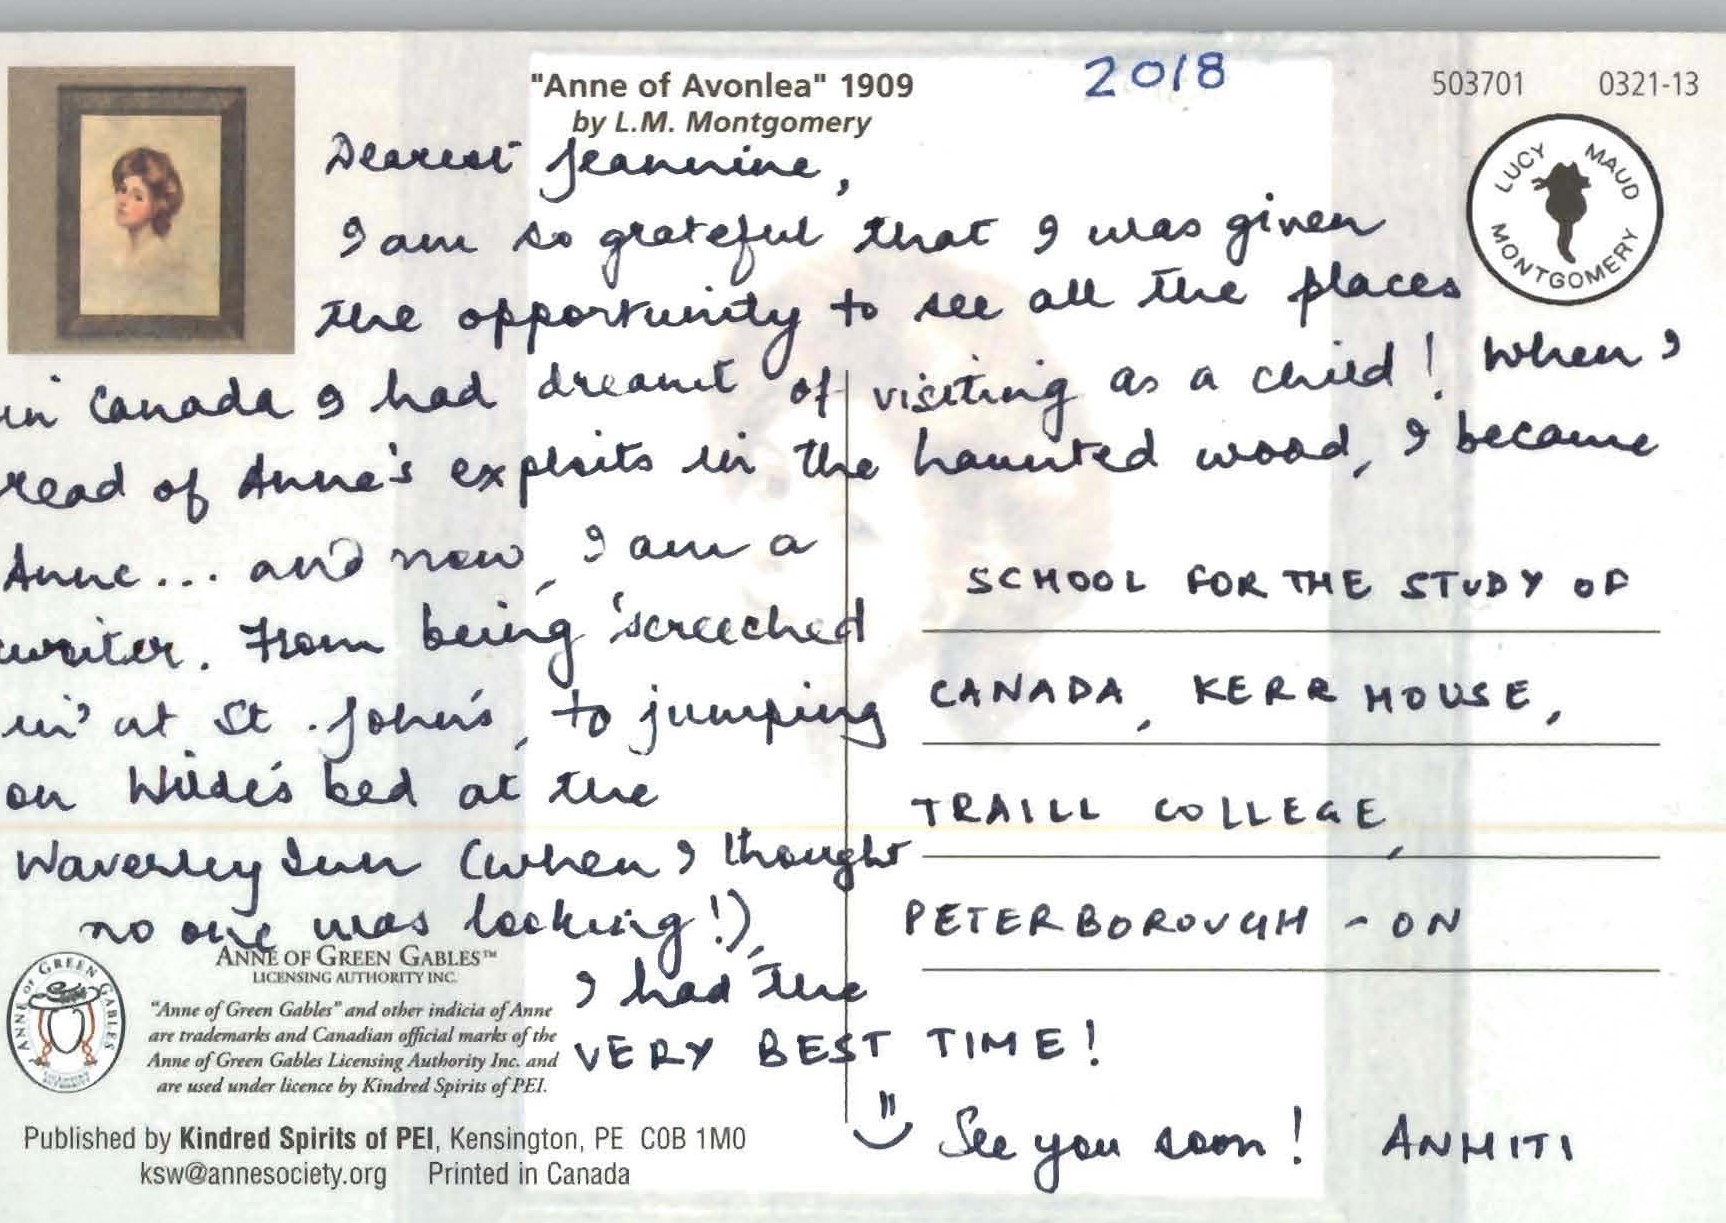 Written message on postcard showing original cover of Anne of Avonlea